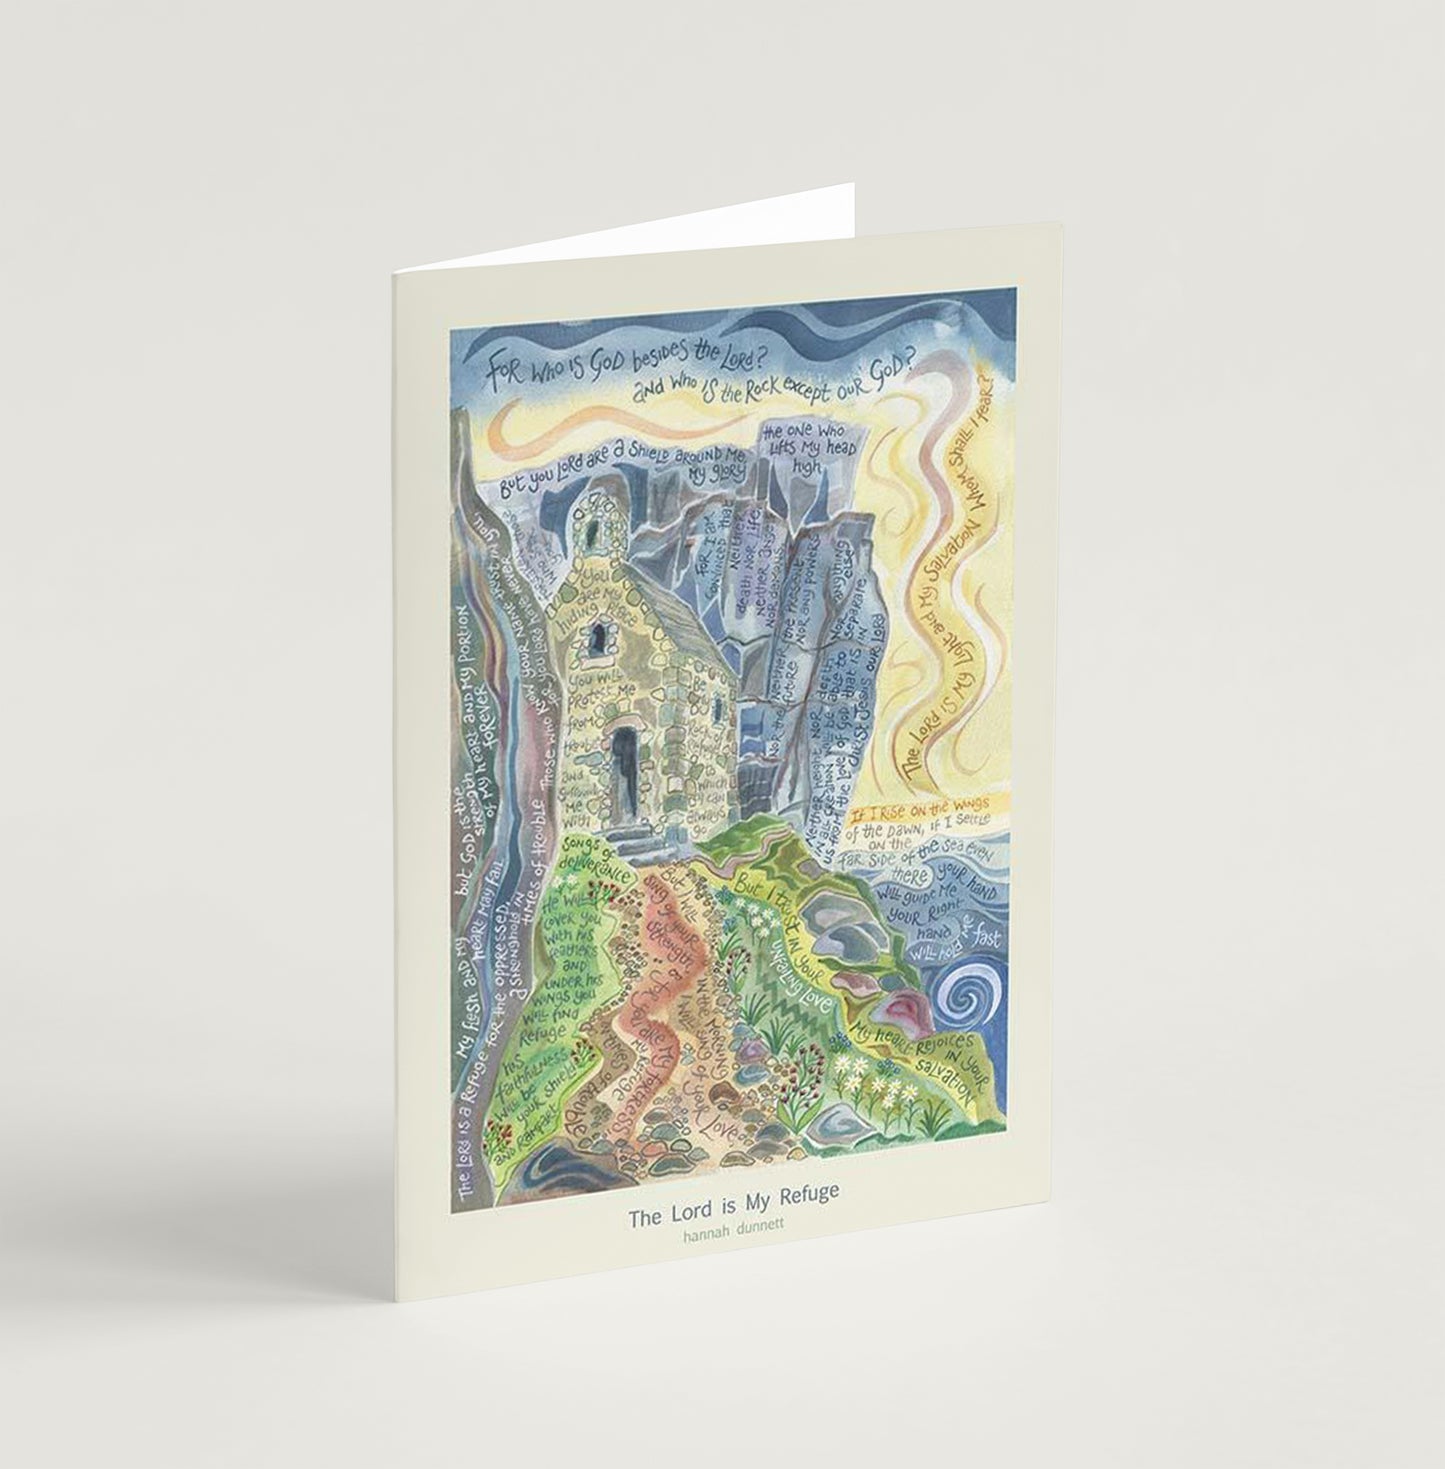 'The Lord is my Refuge' by Hannah Dunnett - Greeting Card